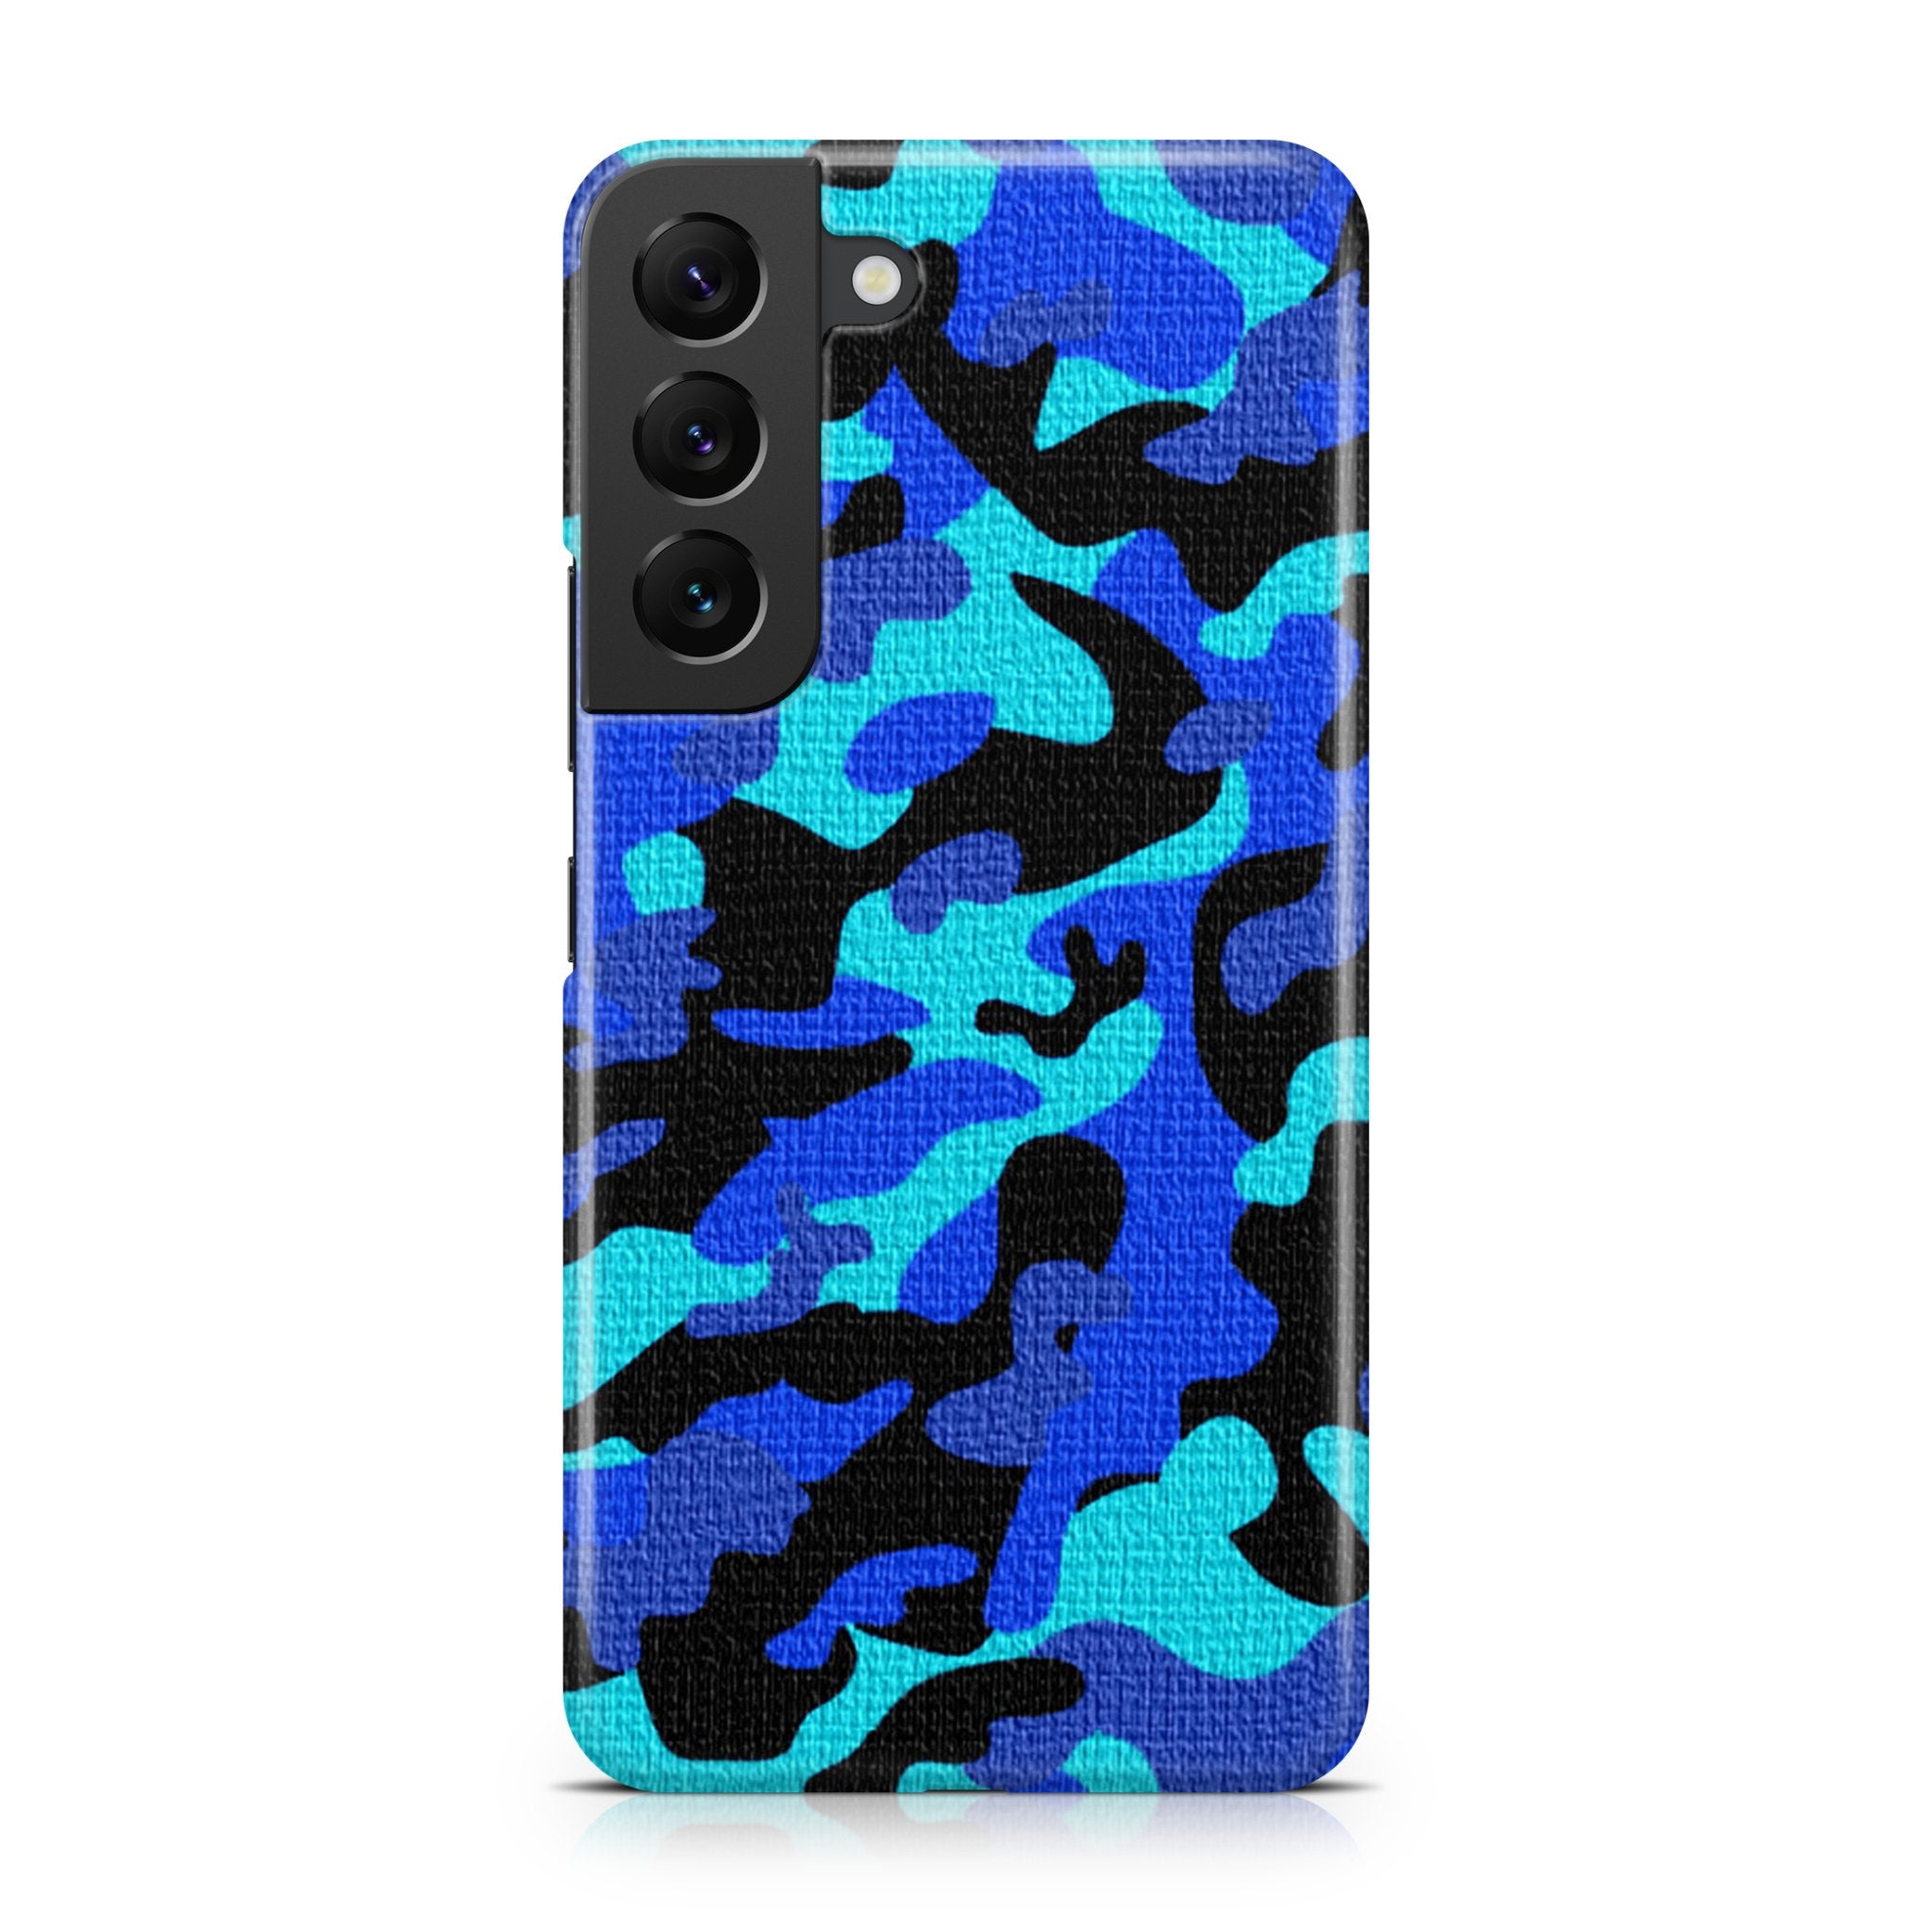 Blue Camo - Samsung phone case designs by CaseSwagger